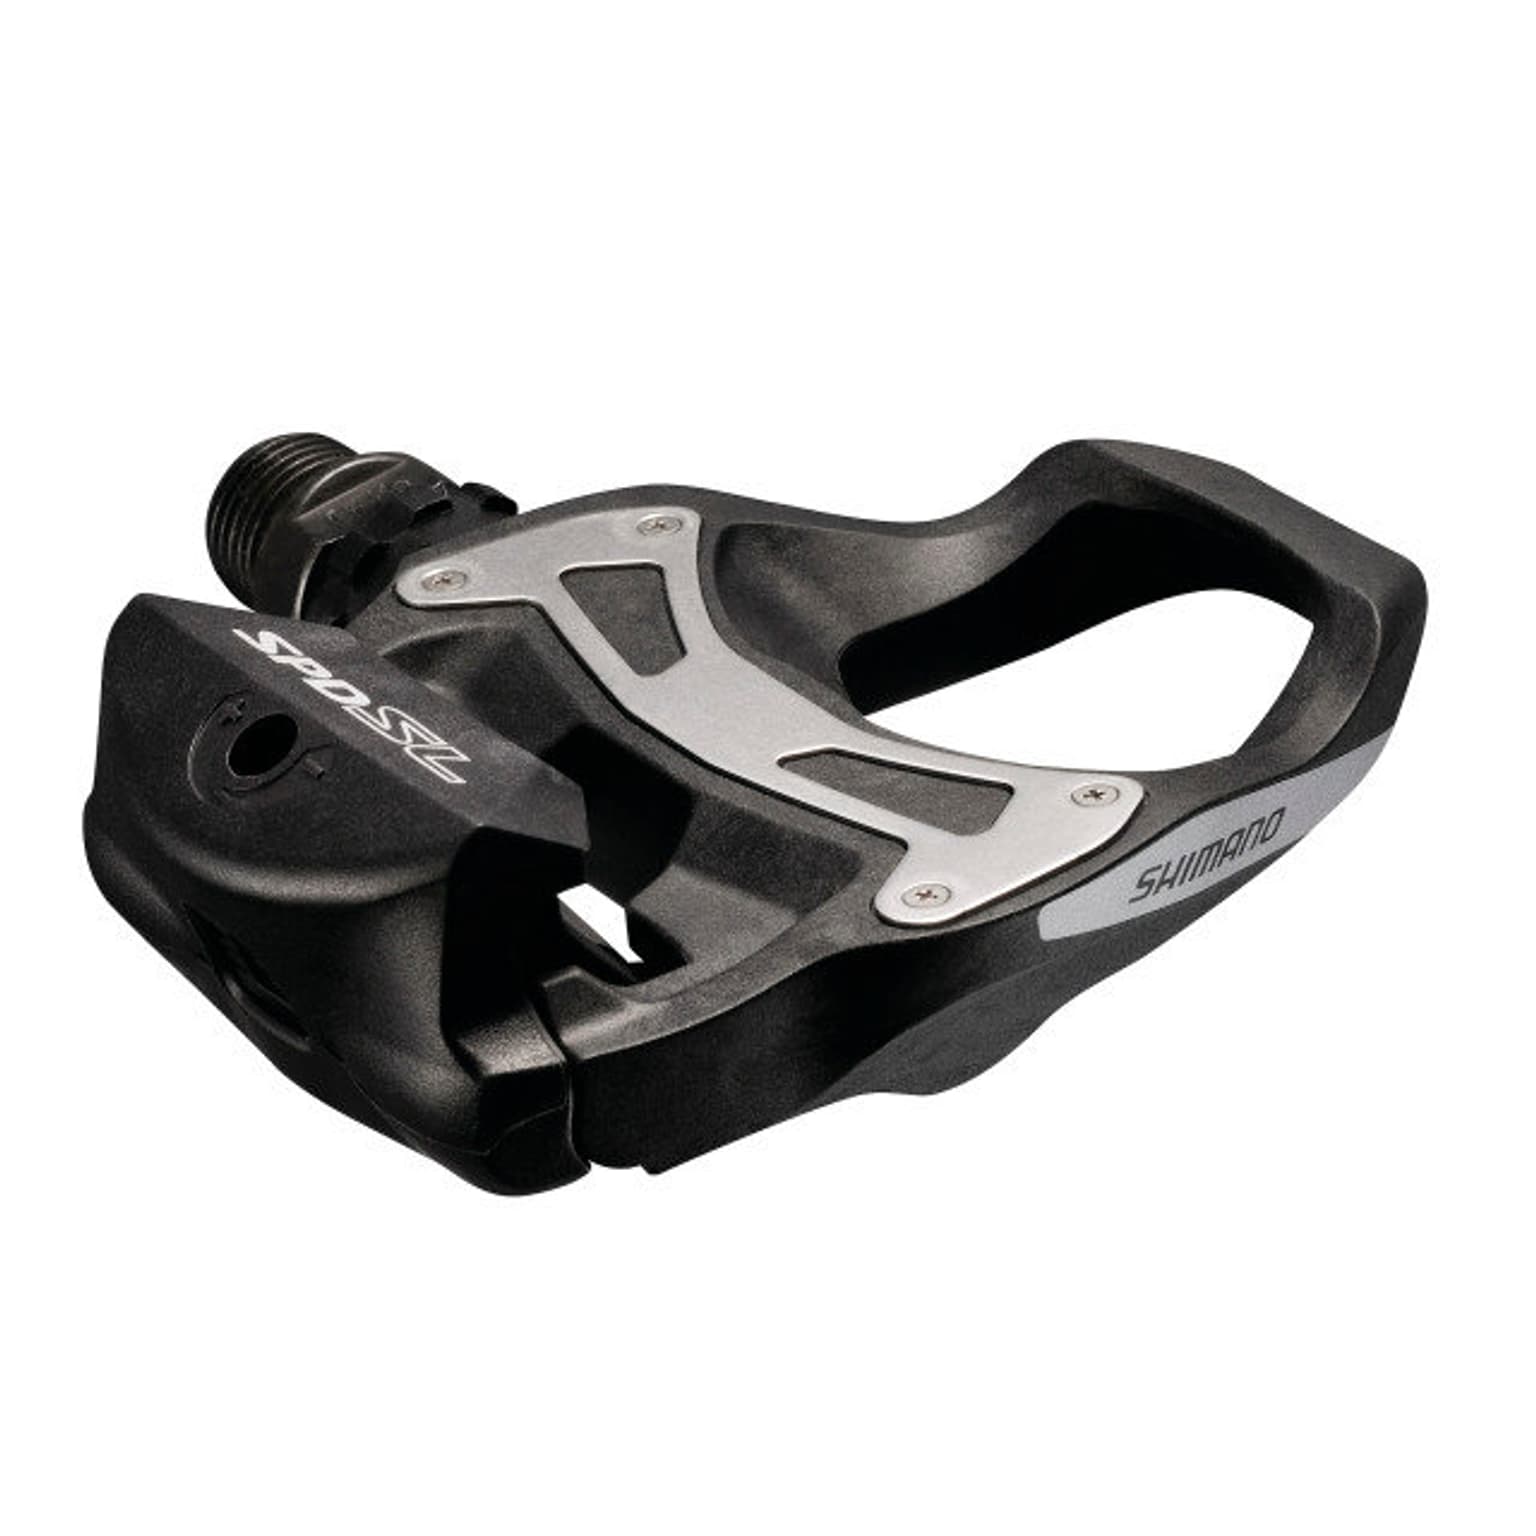 Shimano Shimano 105 PD-R550 Cleat Pédales 1